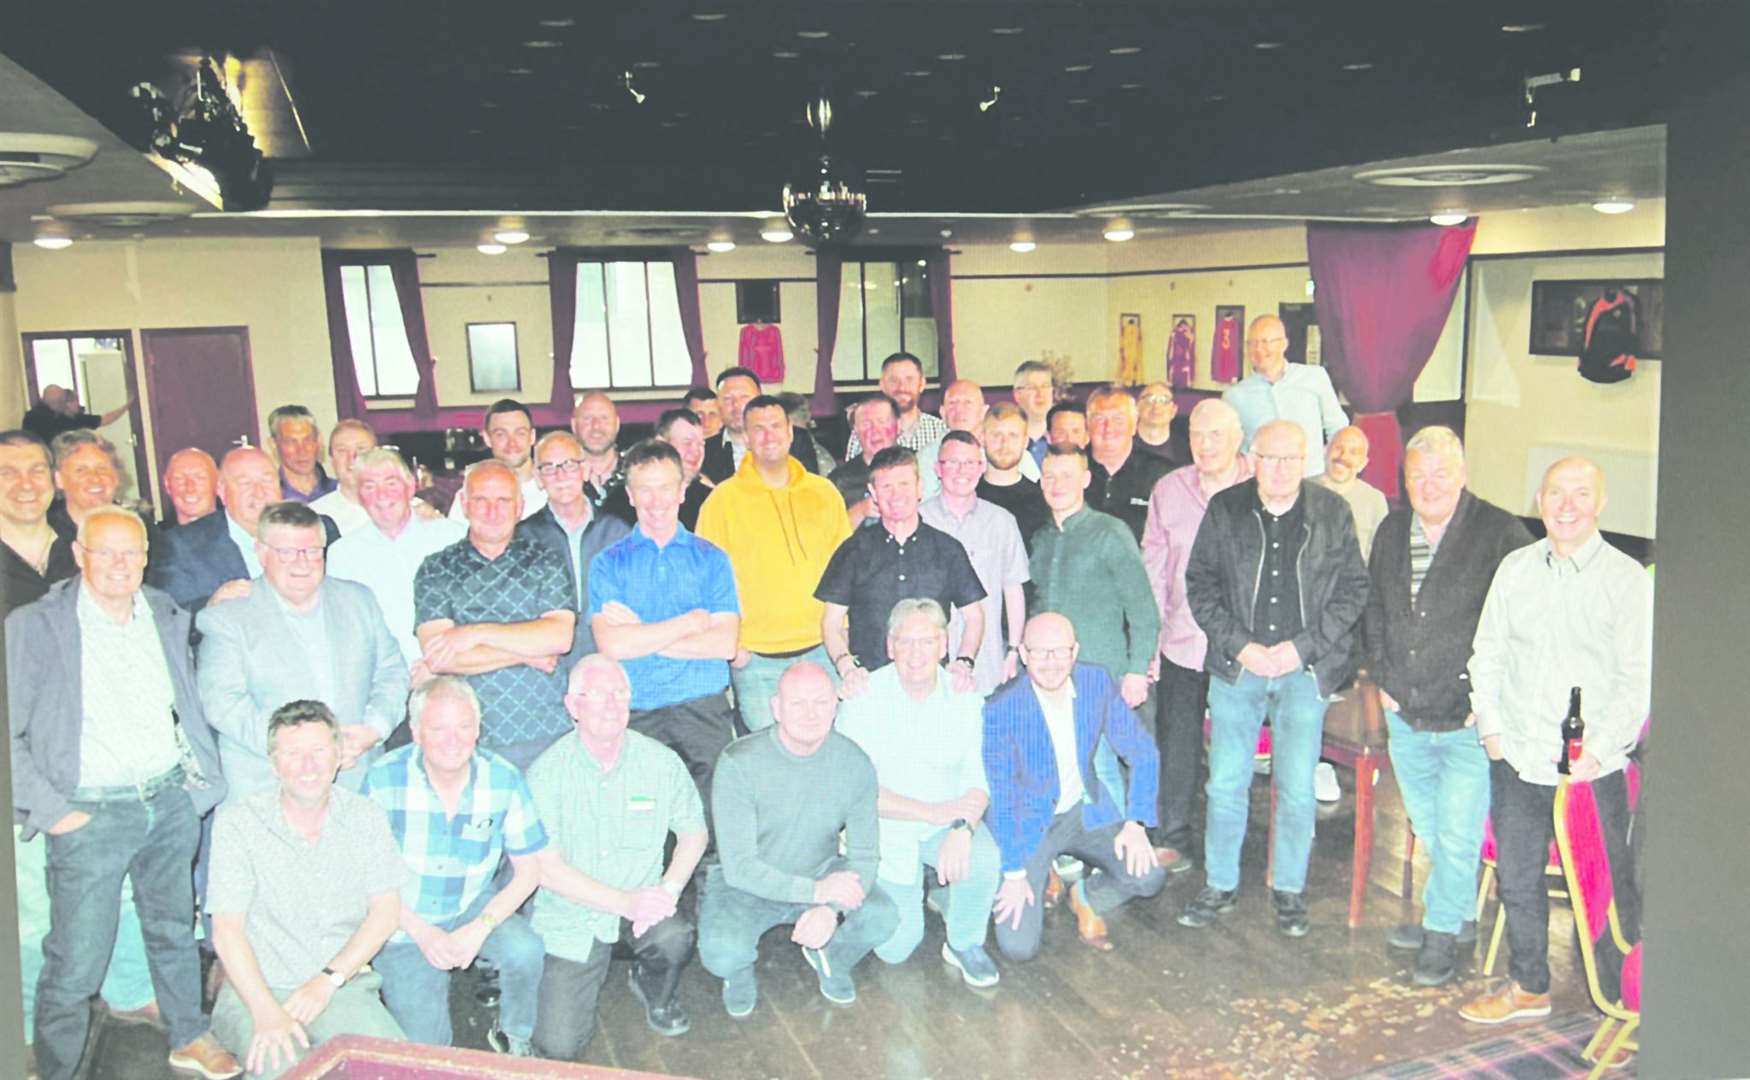 Hill Rovers had a reunion last Saturday to mark 90 years since the club was founded.